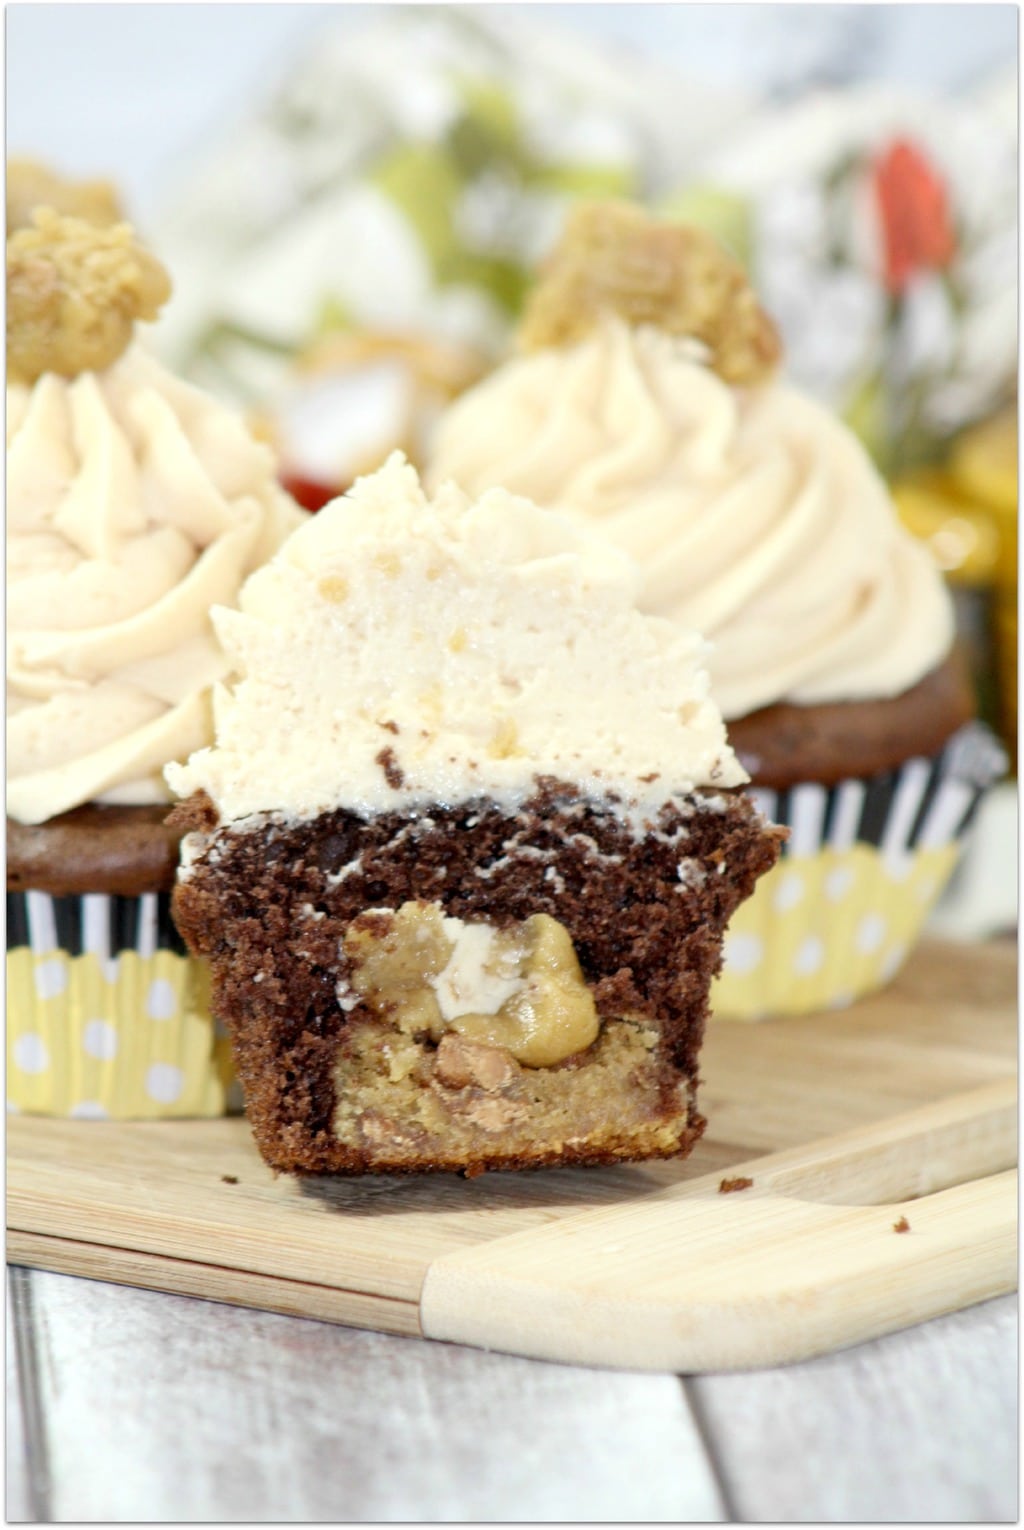 Chocolate peanut butter cupcakes with peanut butter frosting and pinch of peanut butter on top.